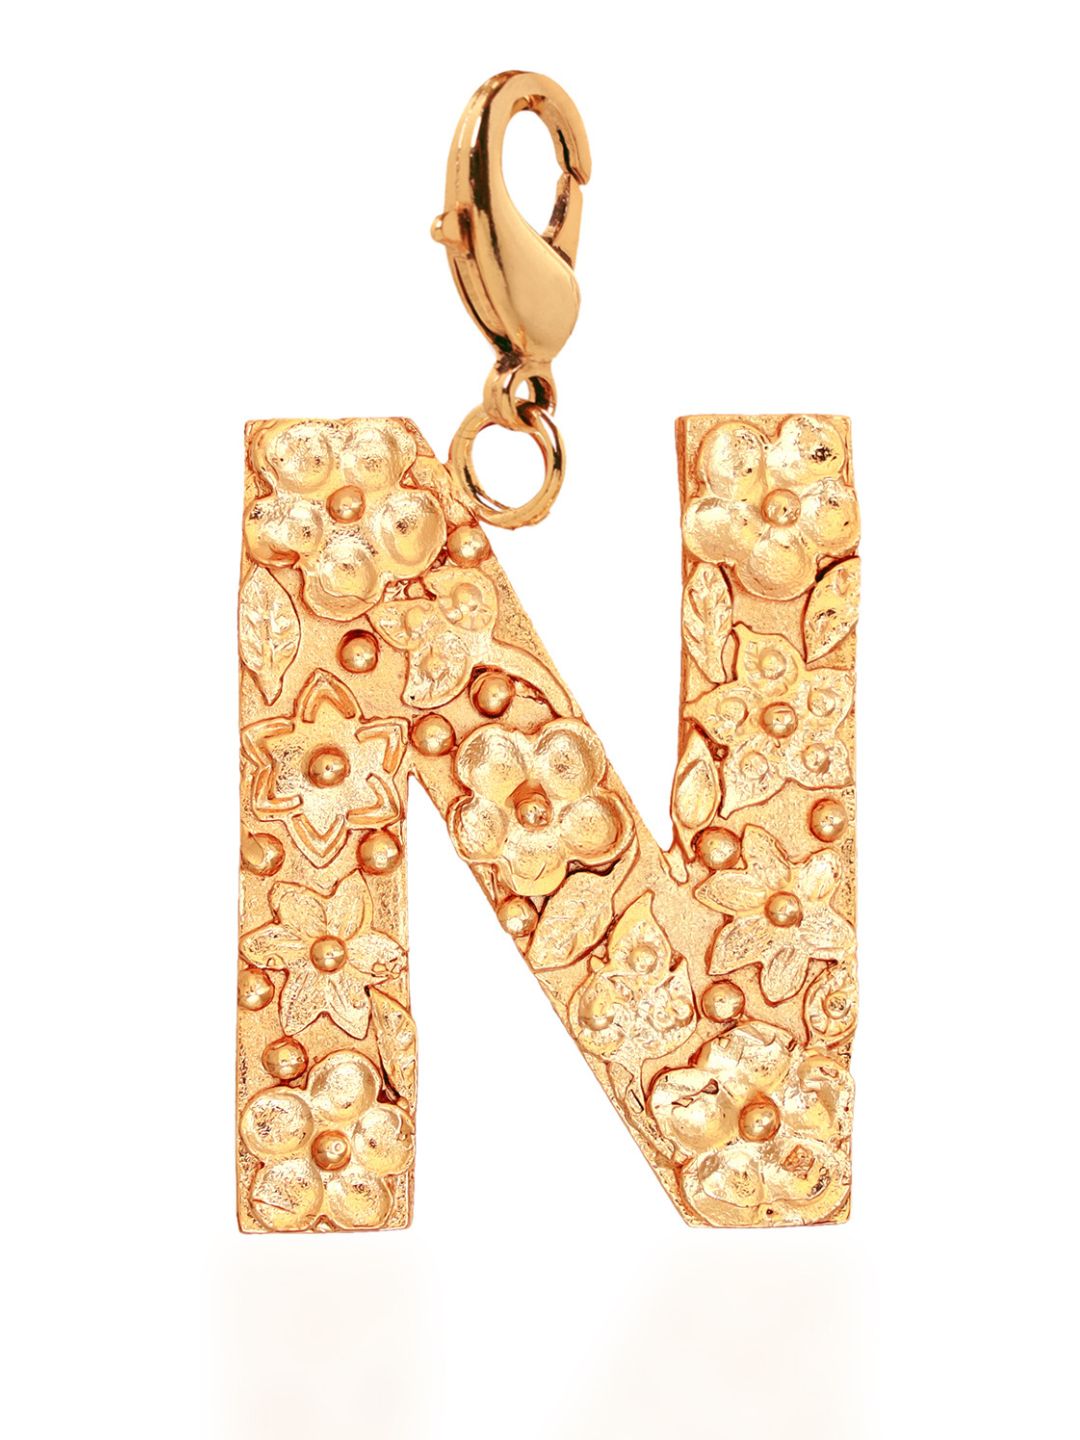 N-Initial Brass & 20 KT Gold Plated Pendant